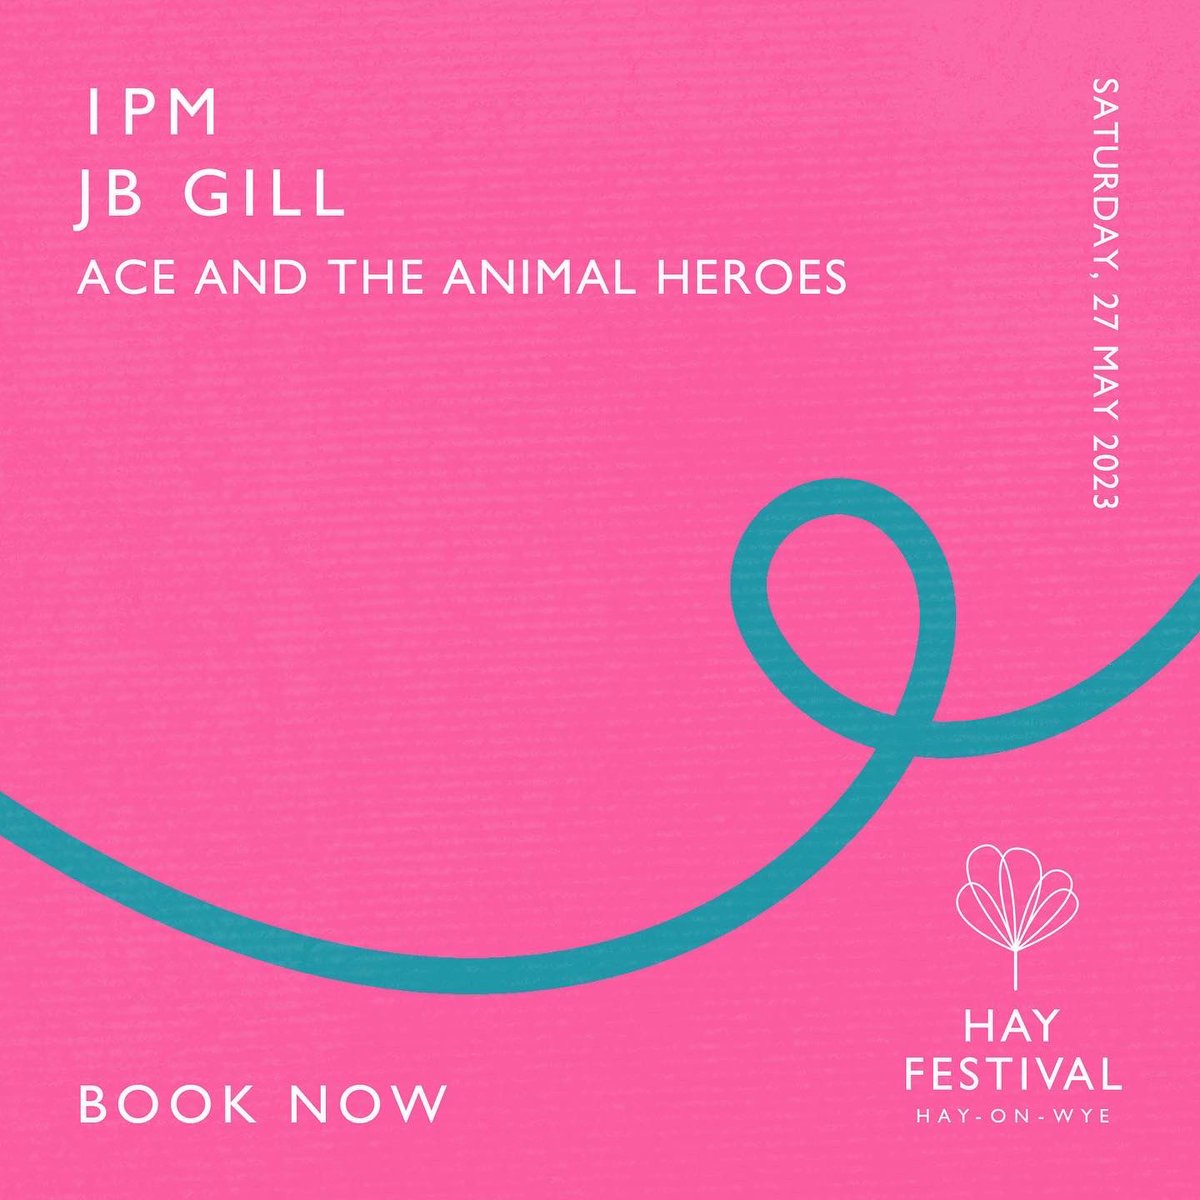 Gassed I’m joining the line up on the 27th May @hayfestival !I’ll be on the ‘Wye Stage’ at 1pm with my book #AceAndTheAnimalHeroes followed by a book signing - Grab your tickets, come see me and don’t forget to bring your books 📚🙌🏾 #TheFarmSquad #hayfestival2023 💫🐮🐐🐷💫